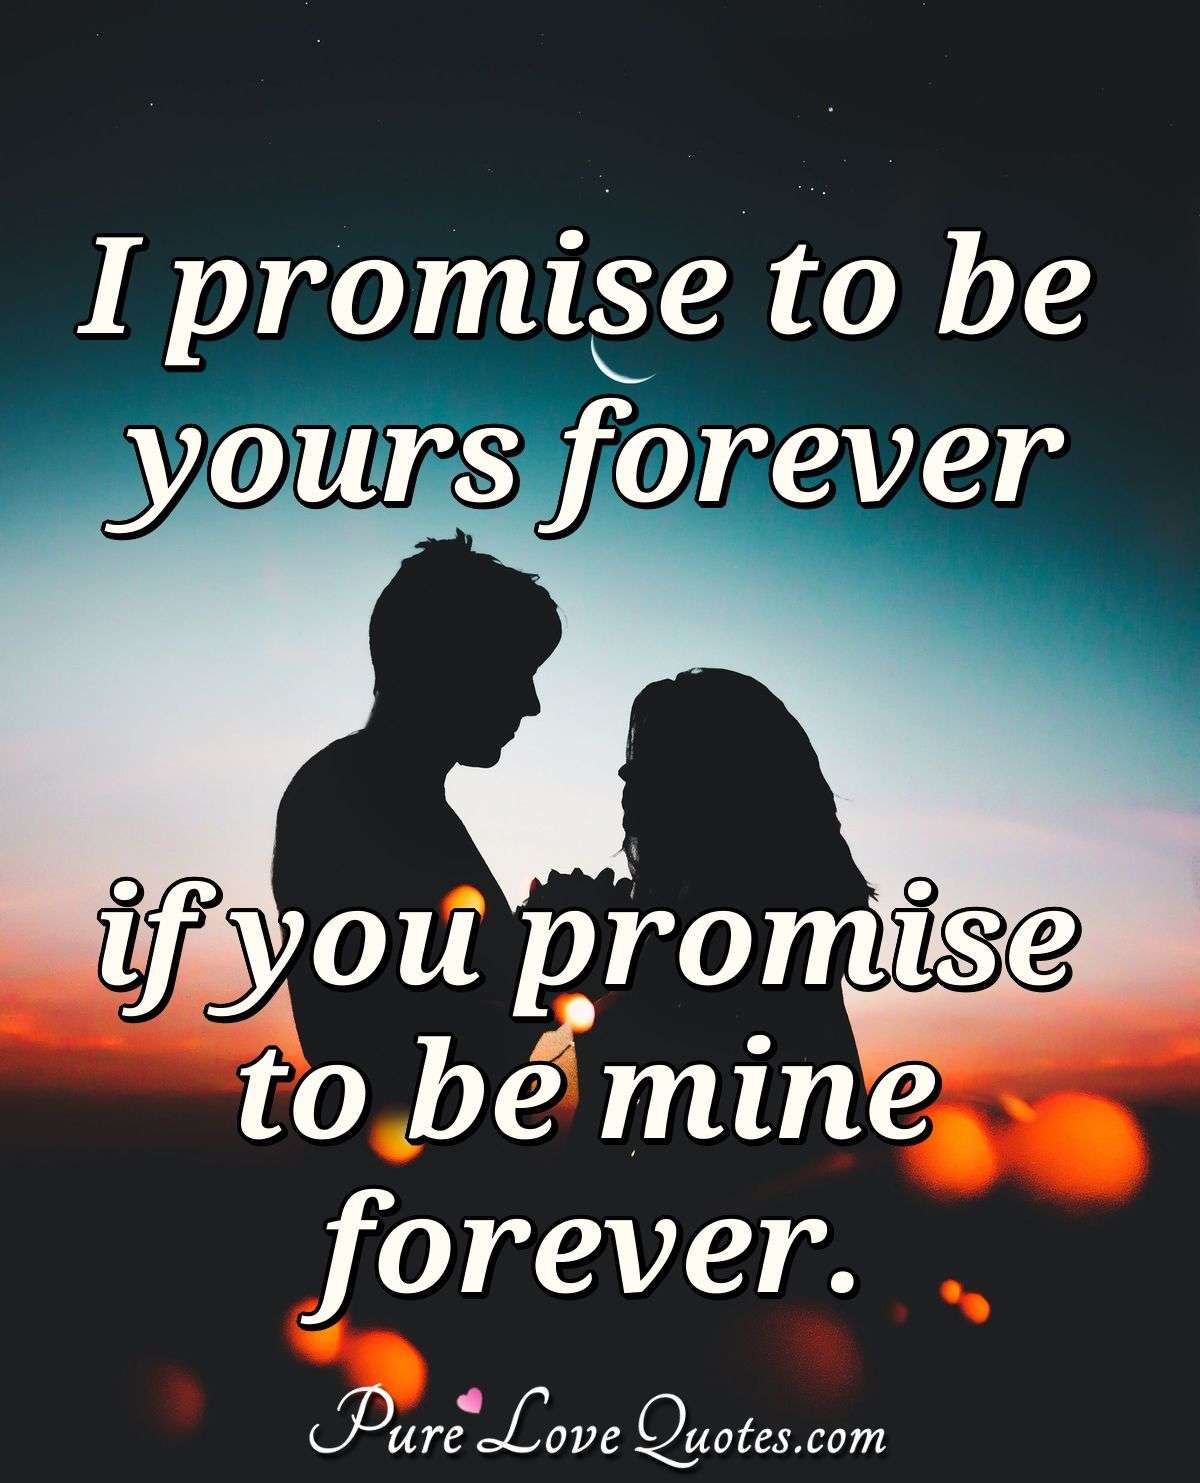 quotes about your boyfriend being yours